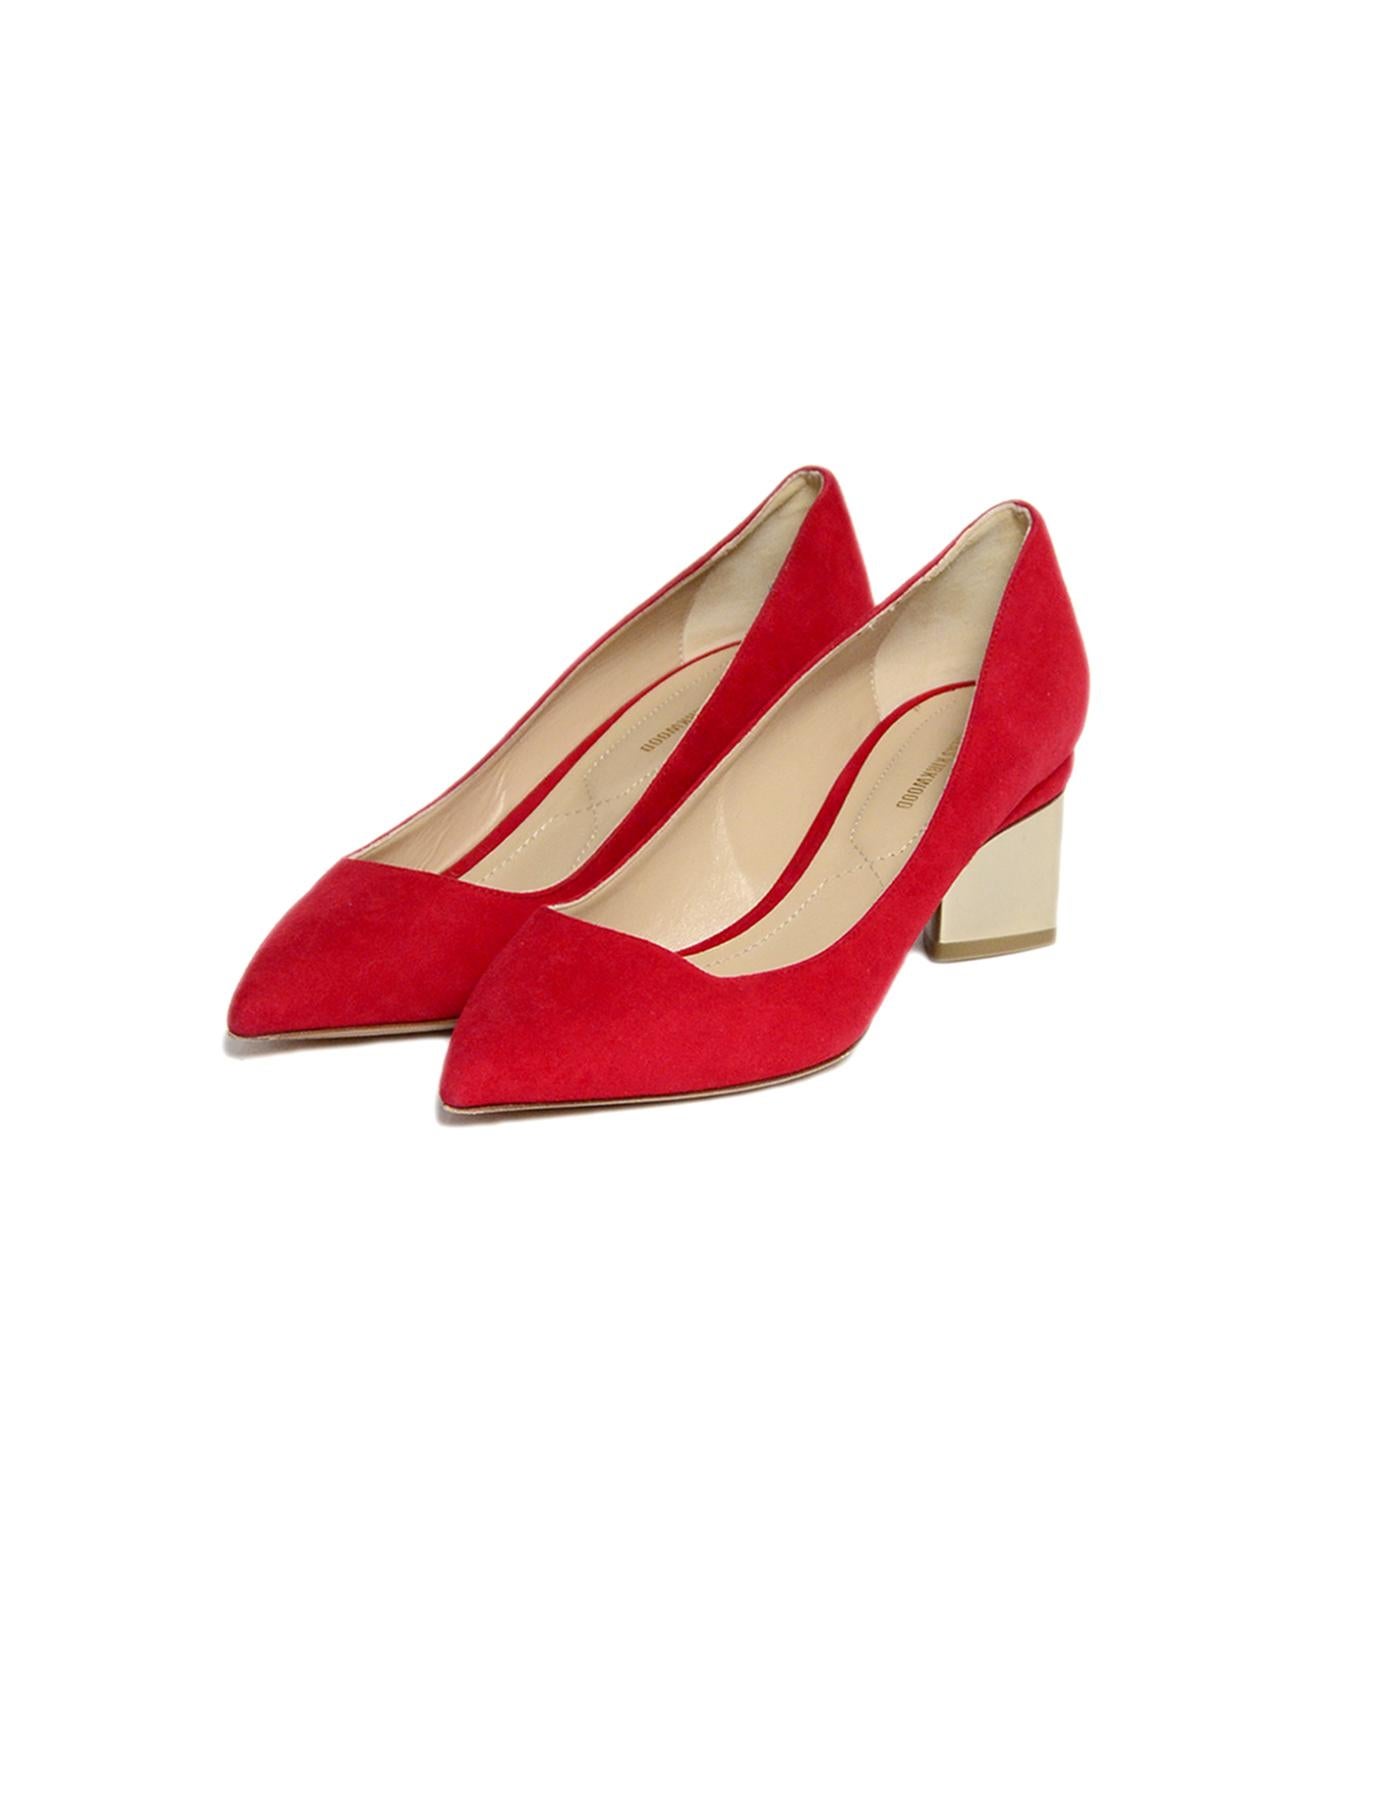 Nicholas Kirkwood Red Suede Prism Pumps w/ Silver Heels sz 37.5 rt $595 In Excellent Condition In New York, NY